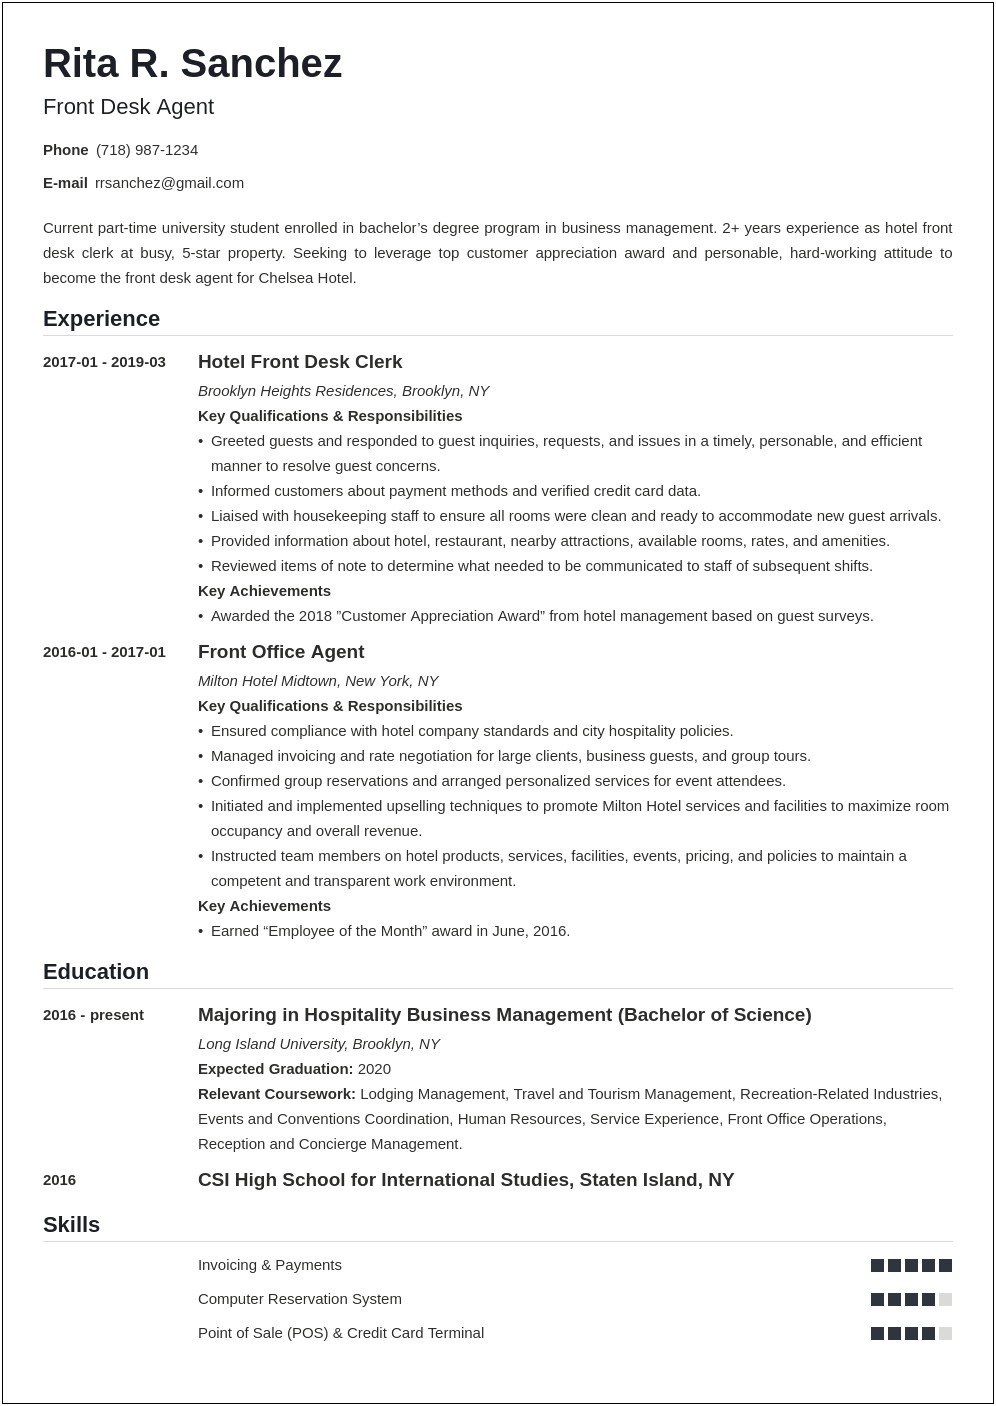 Personal Summary For Resume Front Desk Samples